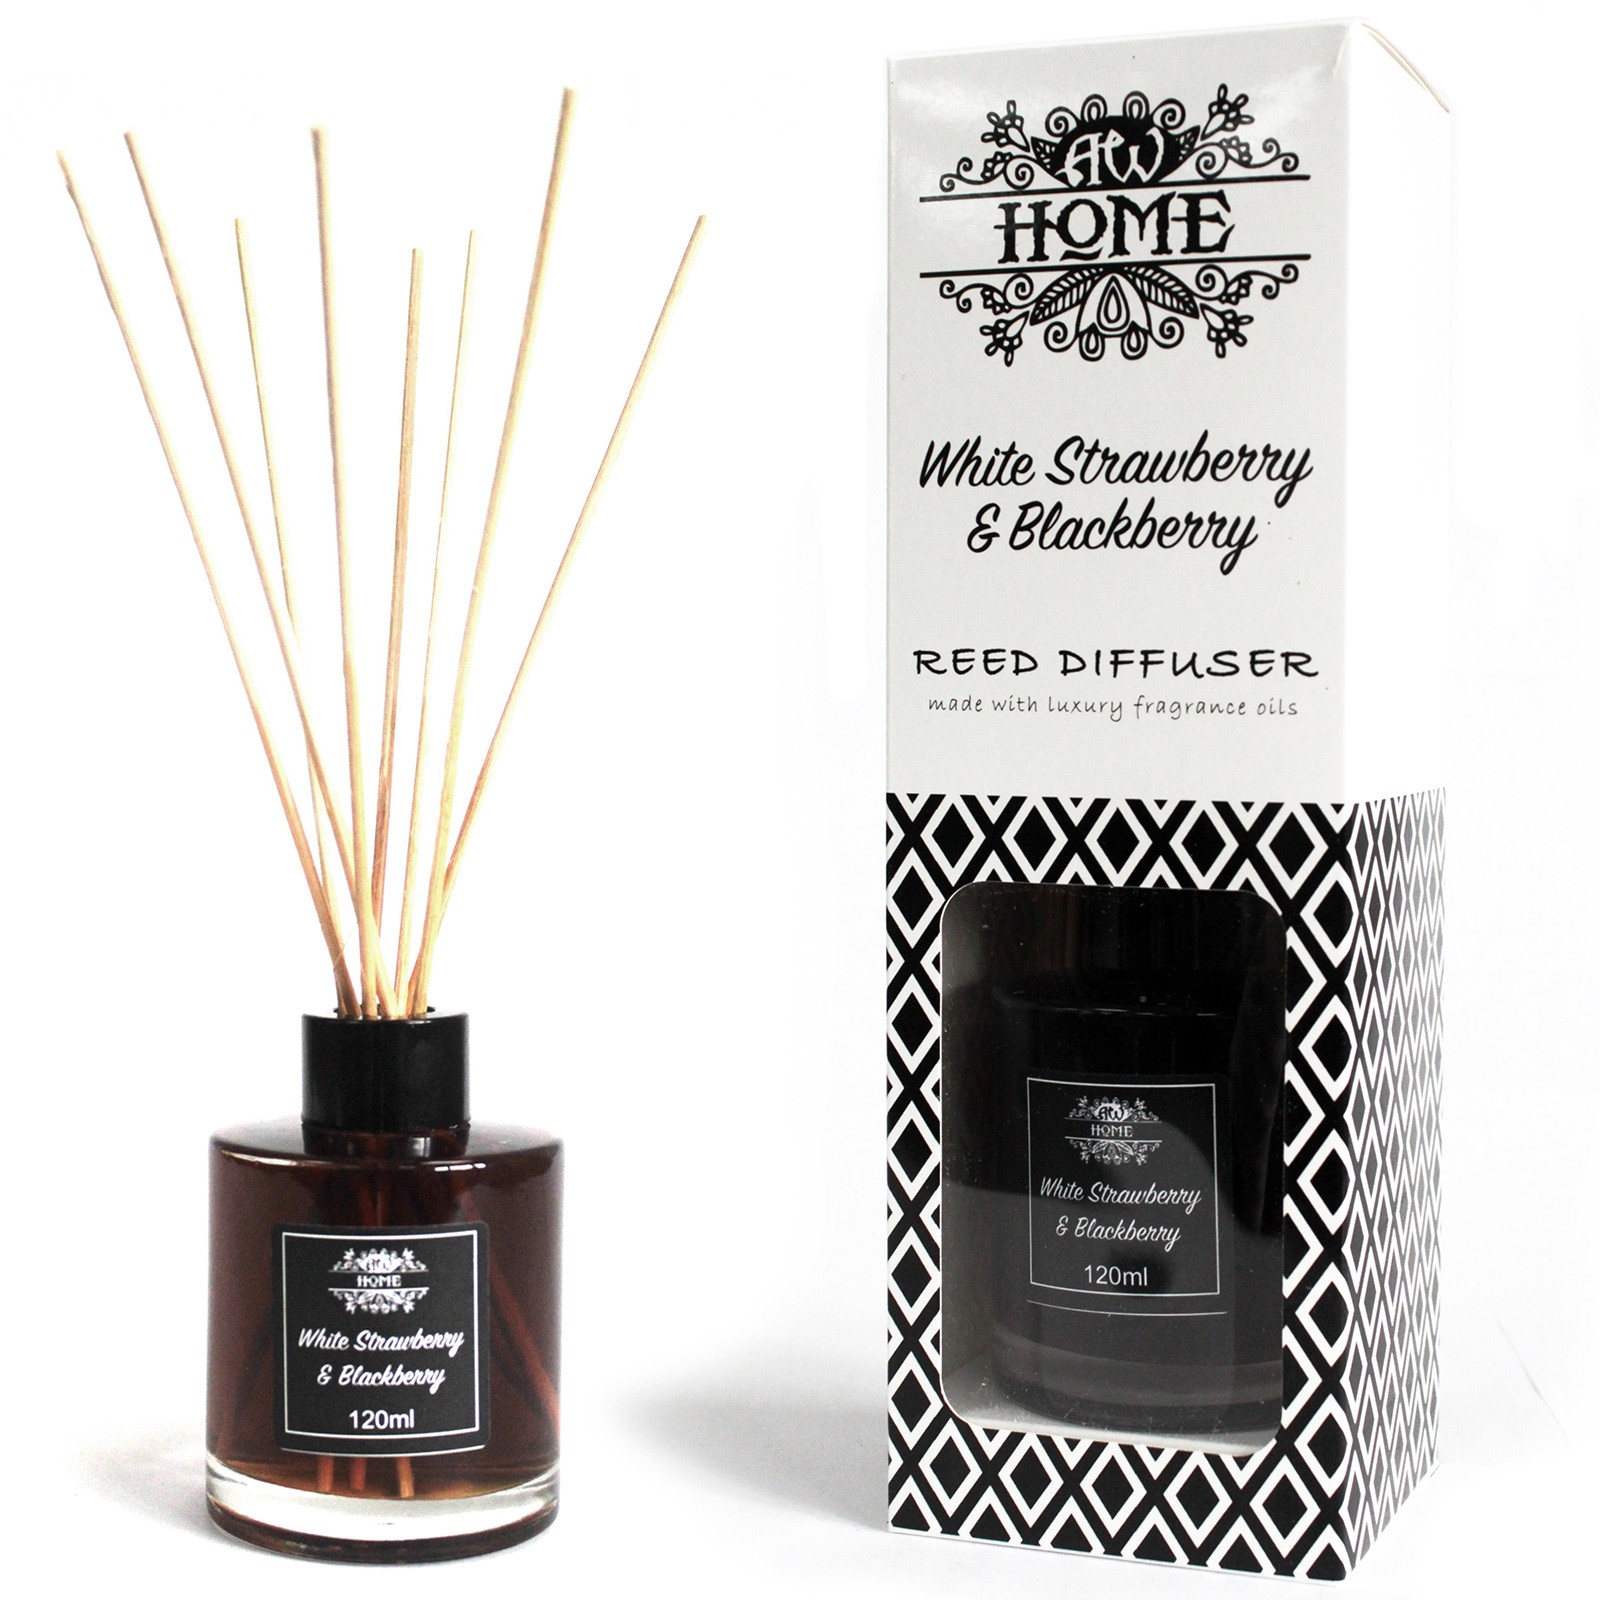 White Strawberry & Blackberry - Home Fragrance Reed Diffuser - 120ml With Reeds